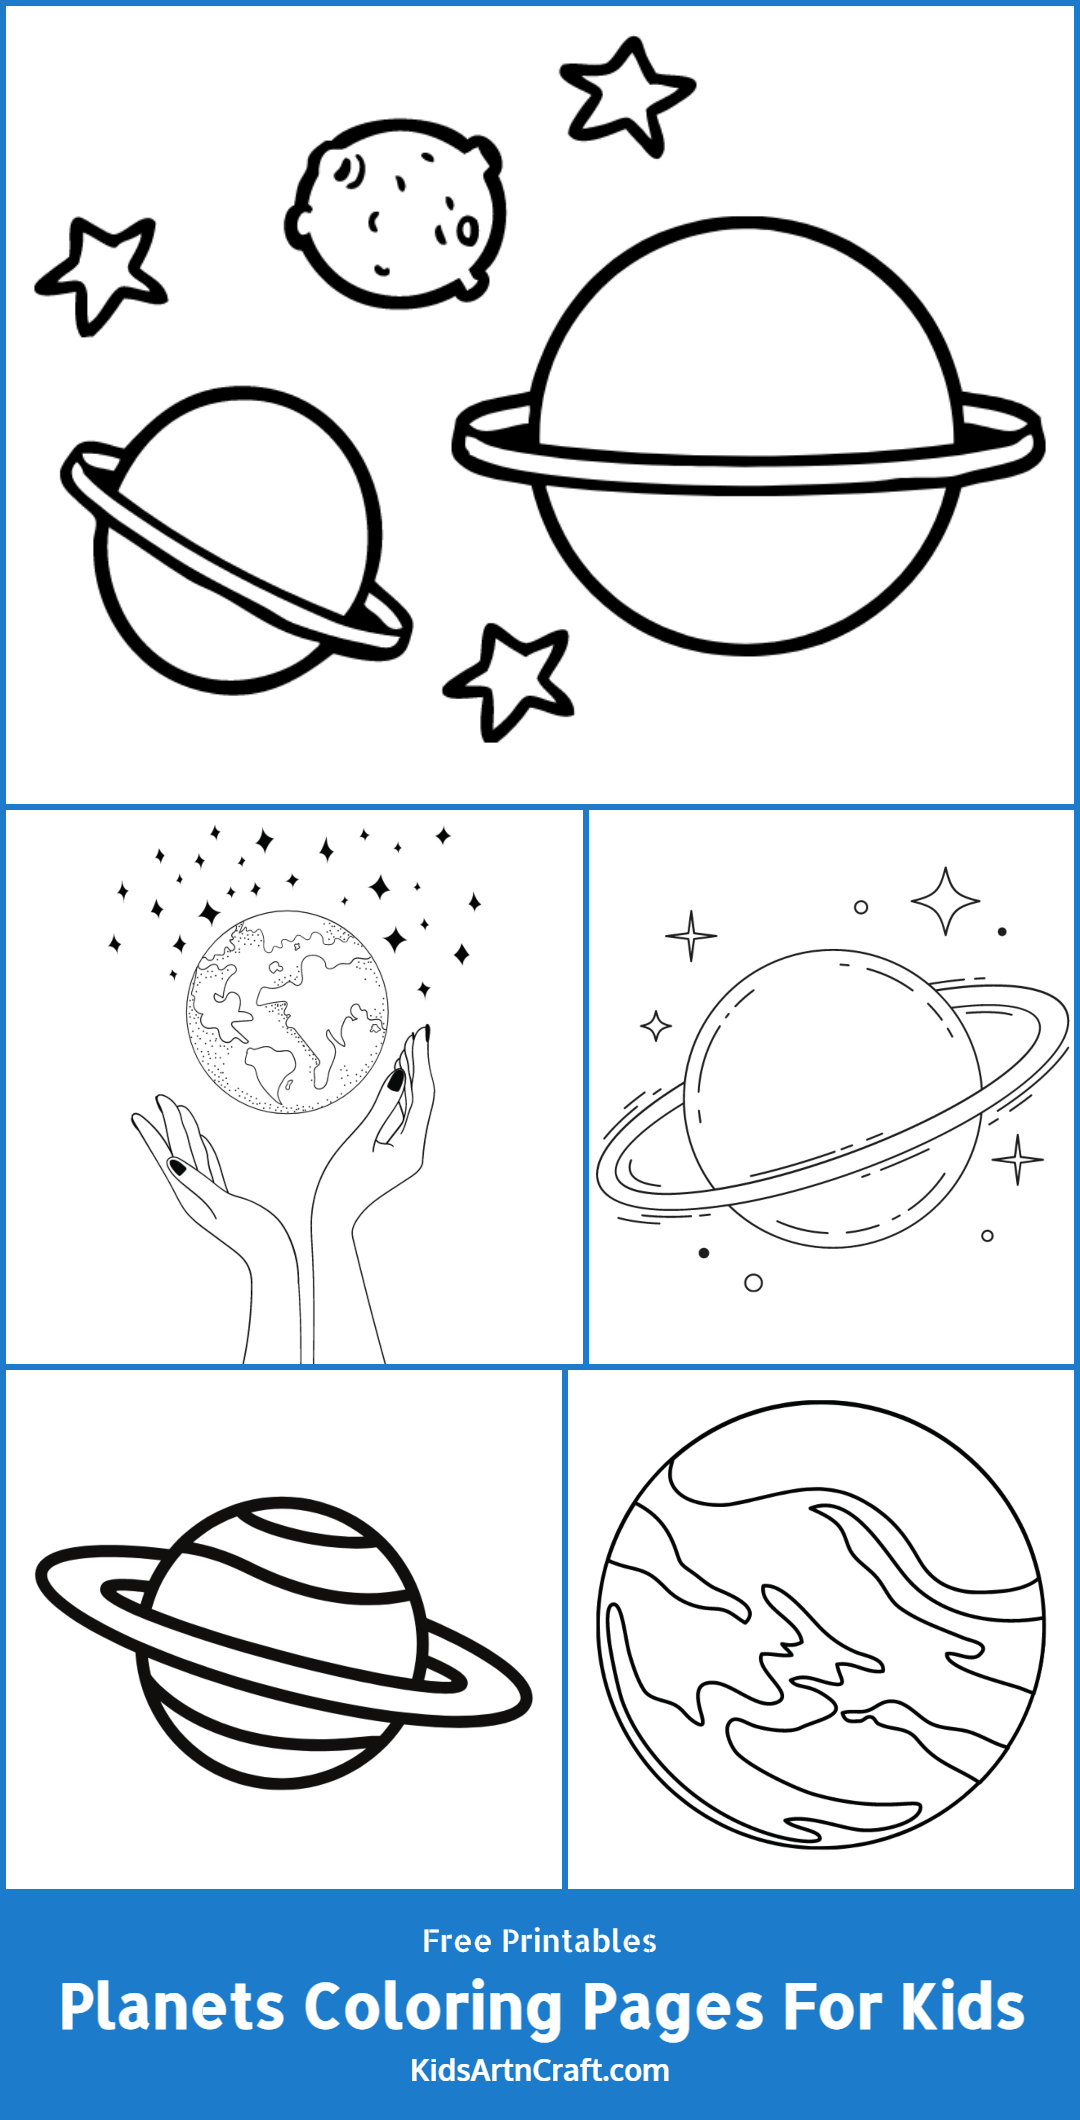 Planets Coloring Pages For Kids – Free Printables